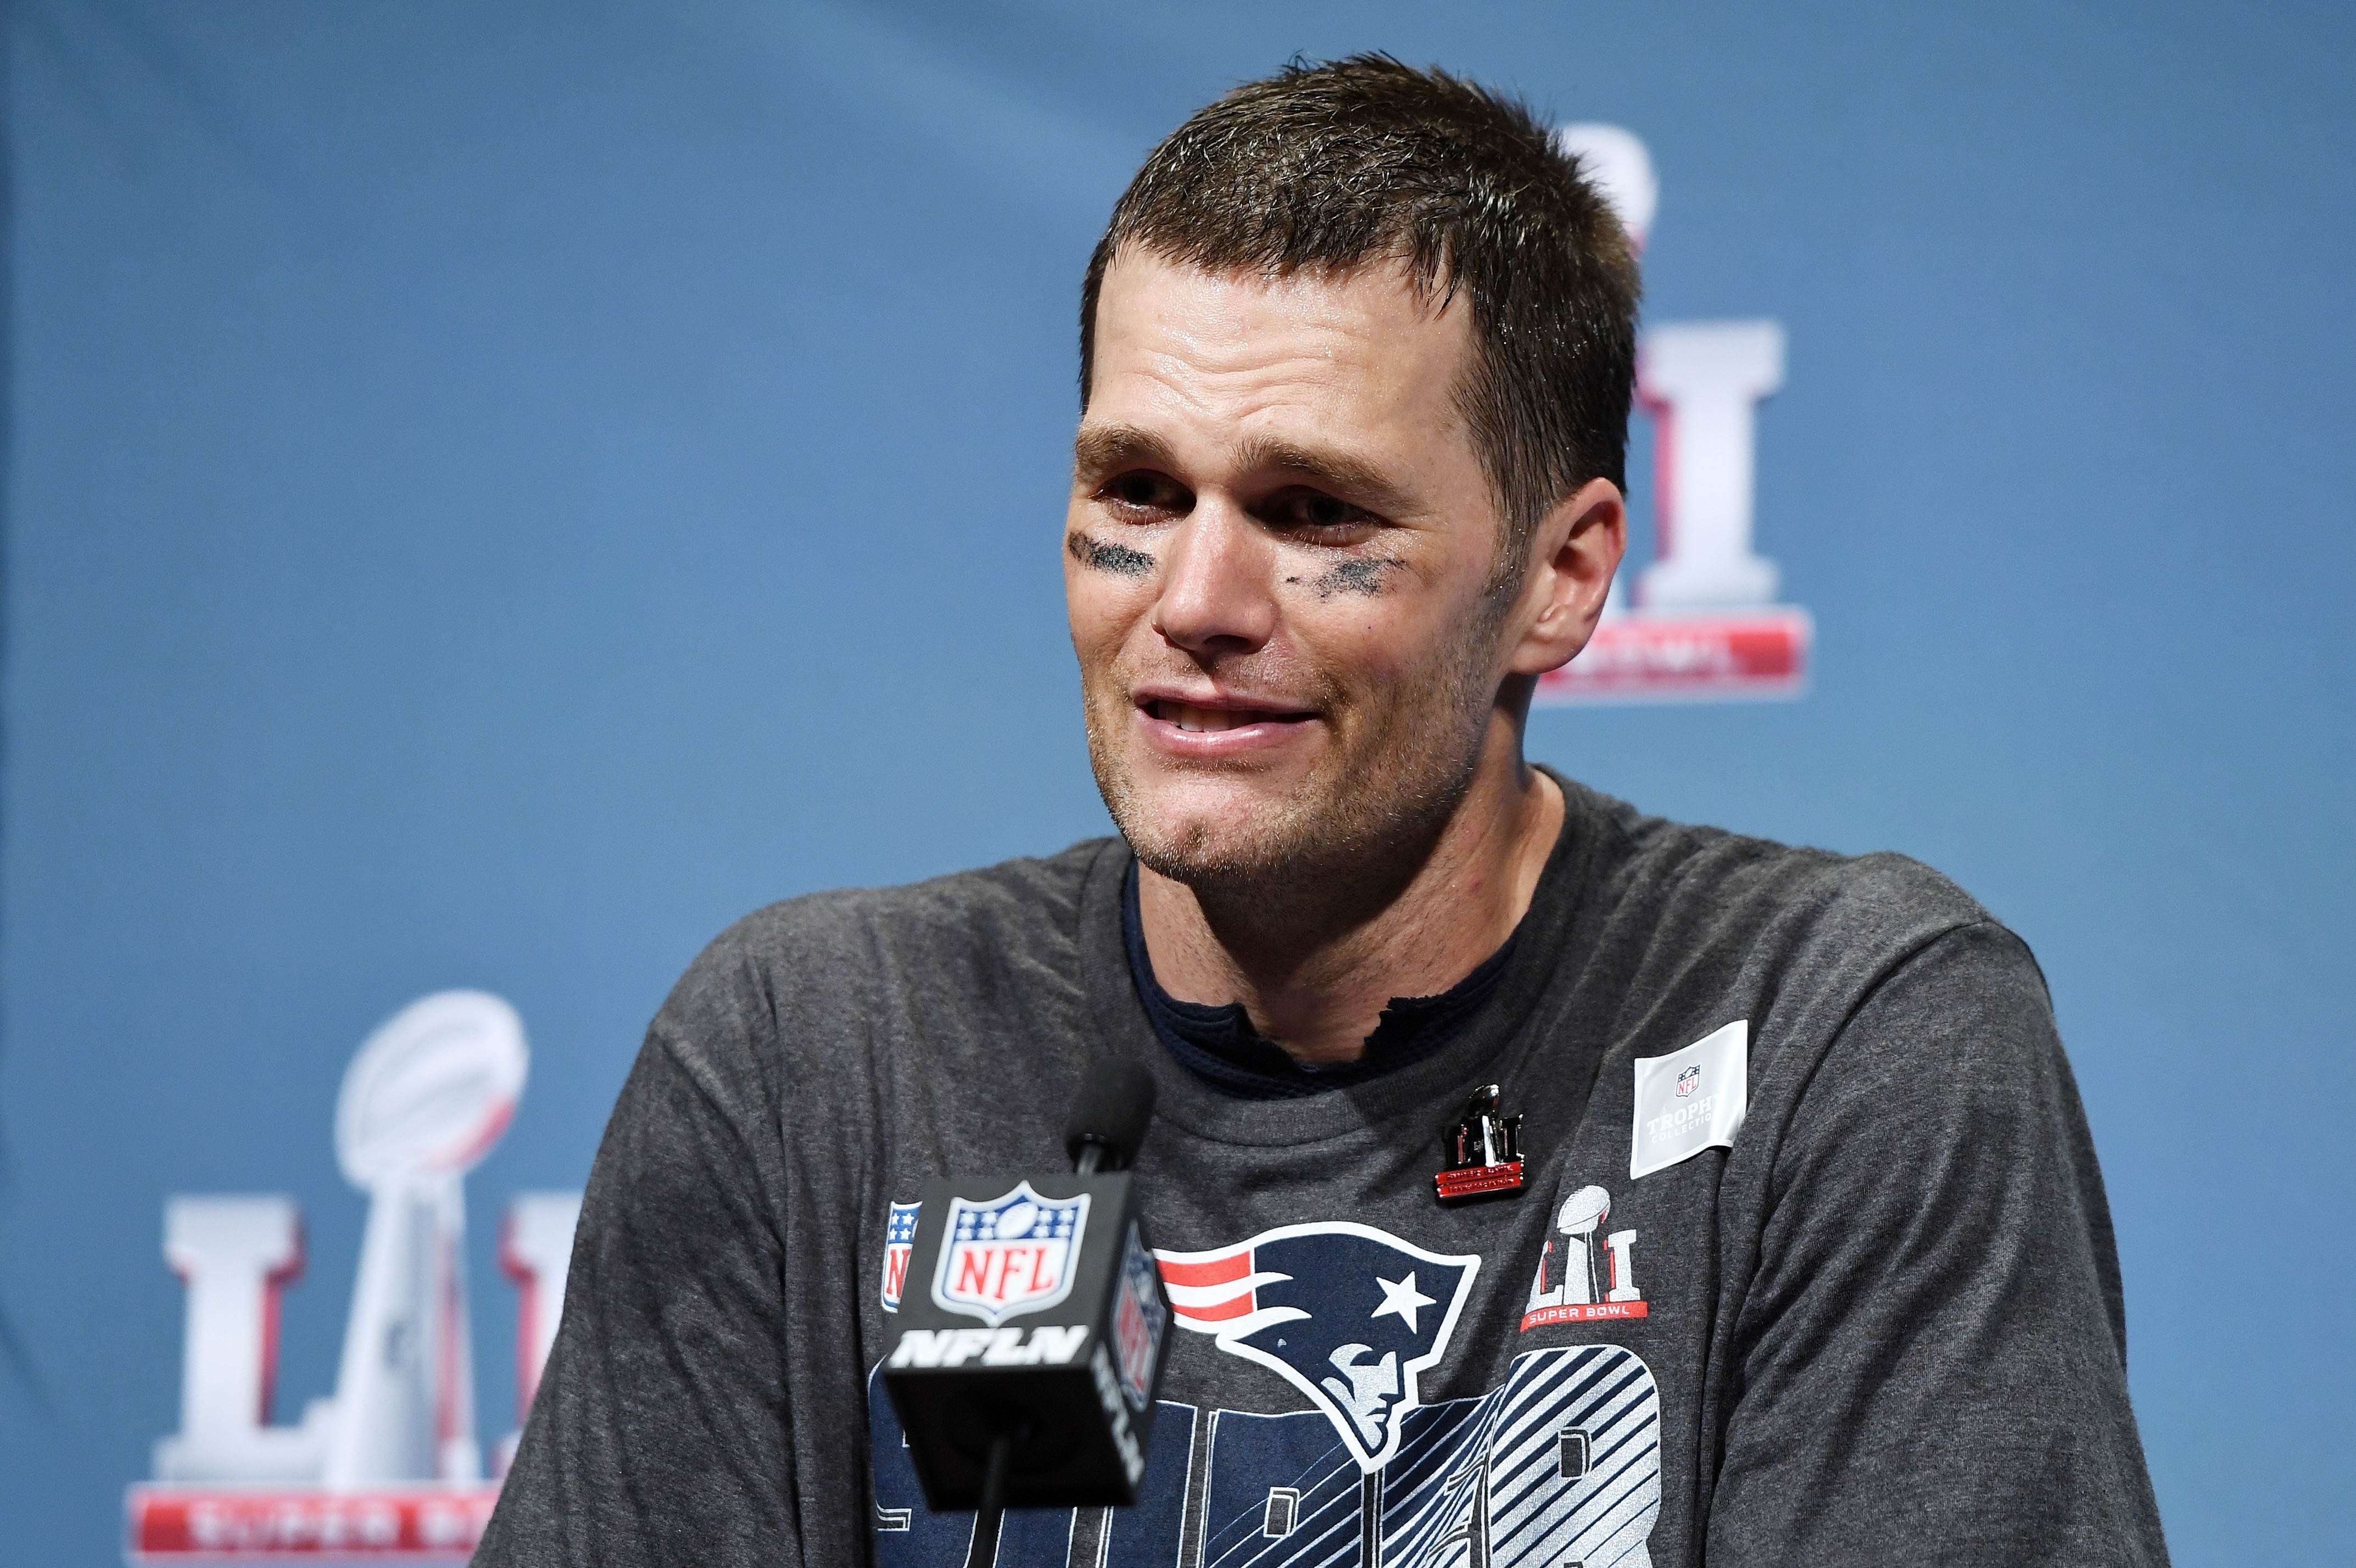 Tom Brady speaks to the media after the Patriots’ Super Bowl victory. Photo: AFP